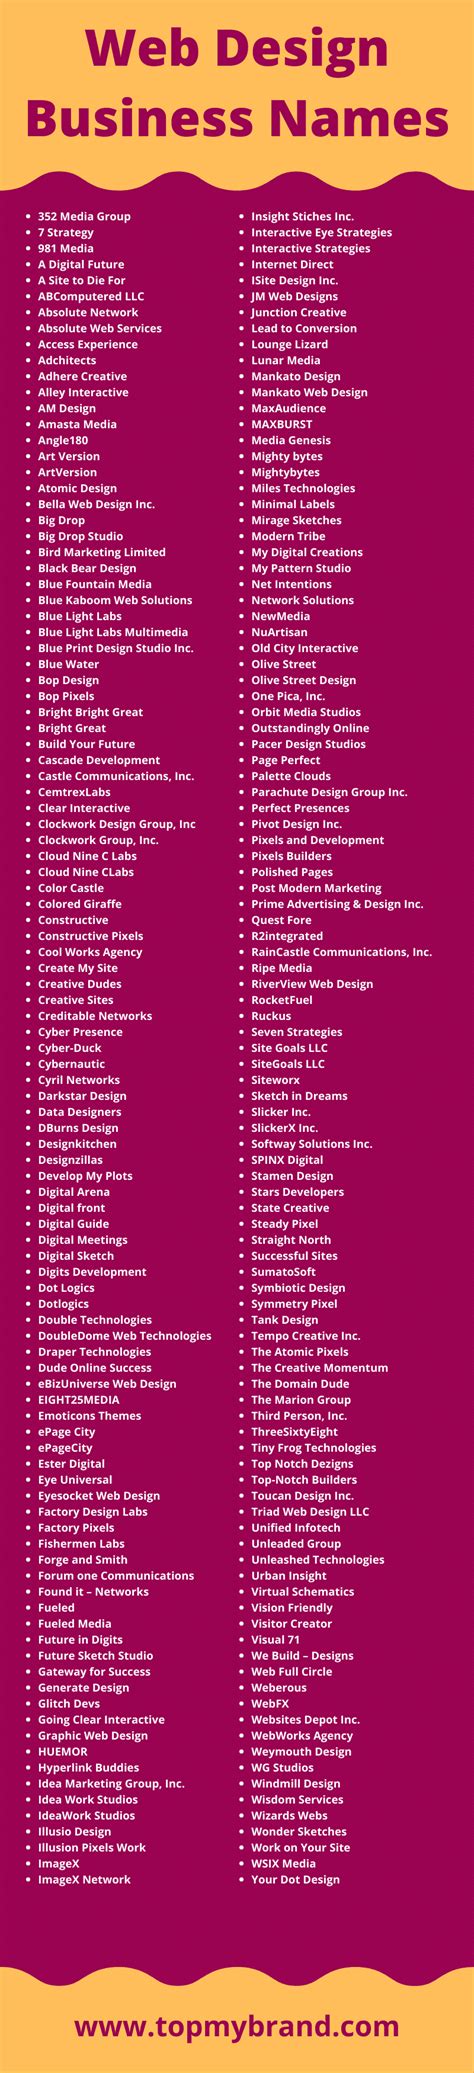 Are you starting a new virtual assistant business? Coming up with a unique, creative, and catchy name can be a challenge. To help you out, we've gathered a list of over 75 original and inspiring virtual assistant business names ideas that are sure to get you thinking about the perfect name for your business.. 